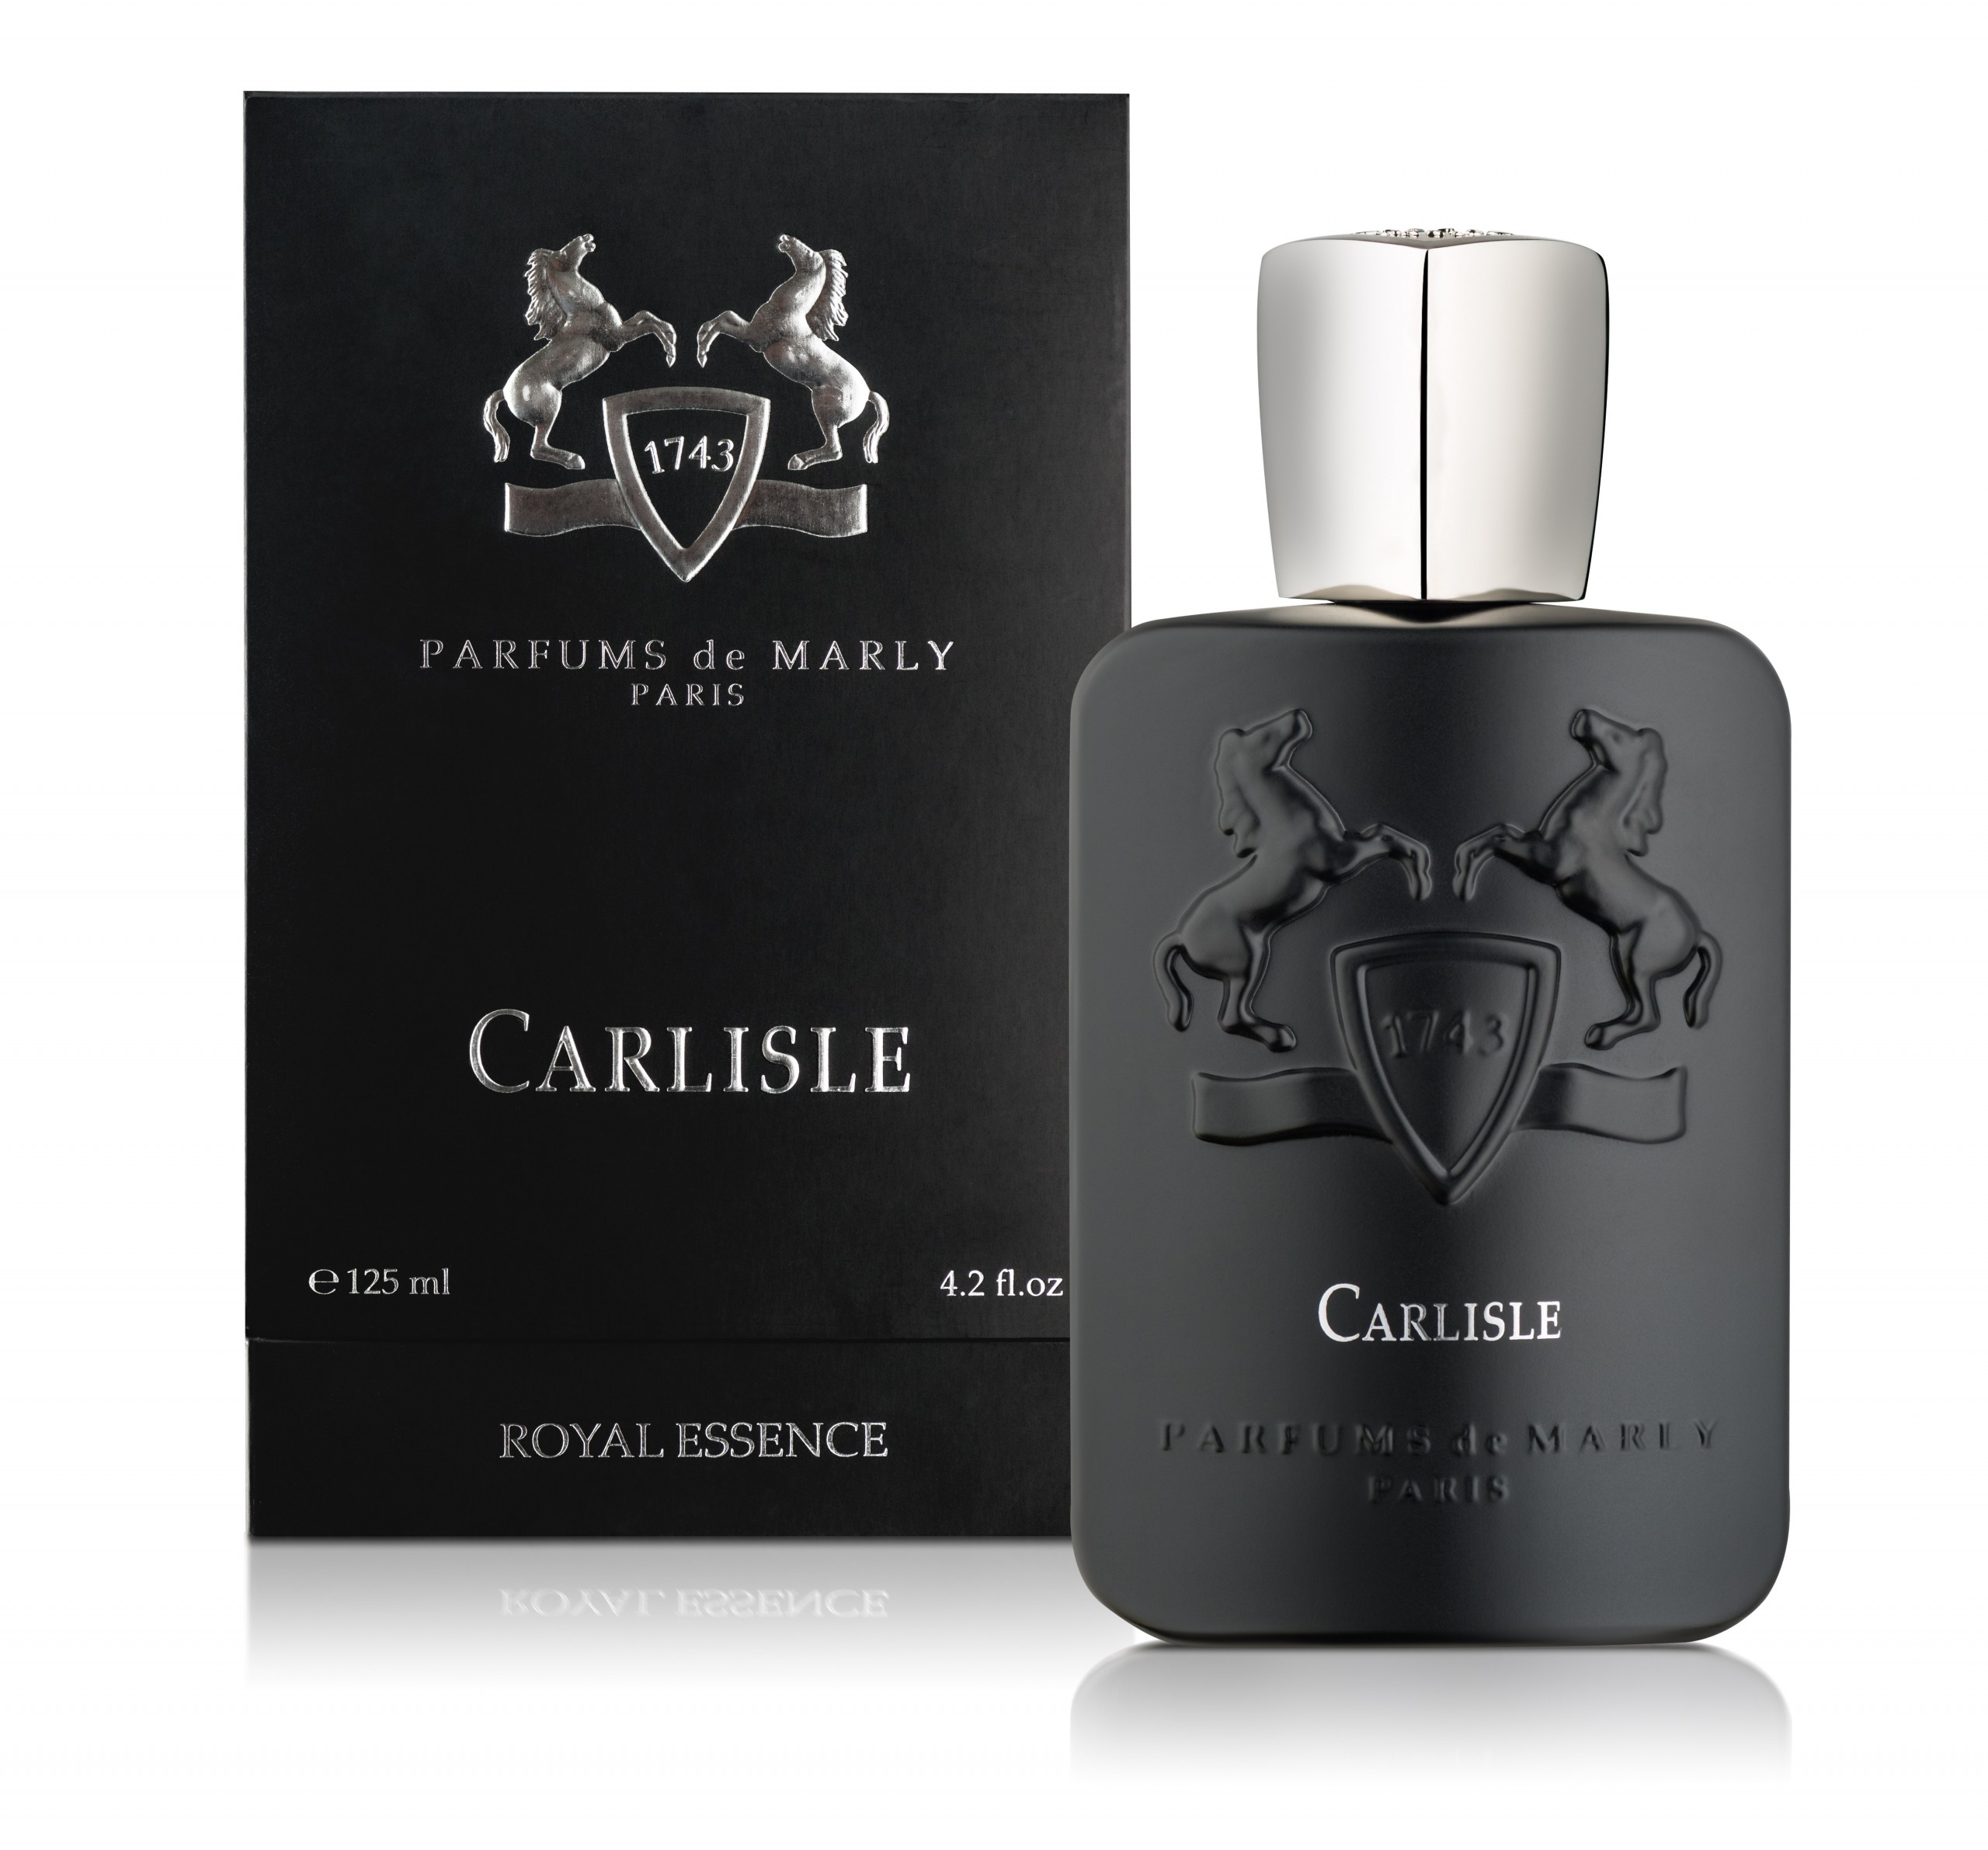 Royal essence. Парфюм де Марли. Карлайл Парфюм де Марли. Carlisle by Parfums de Marly. Духи Parfums de Marly.